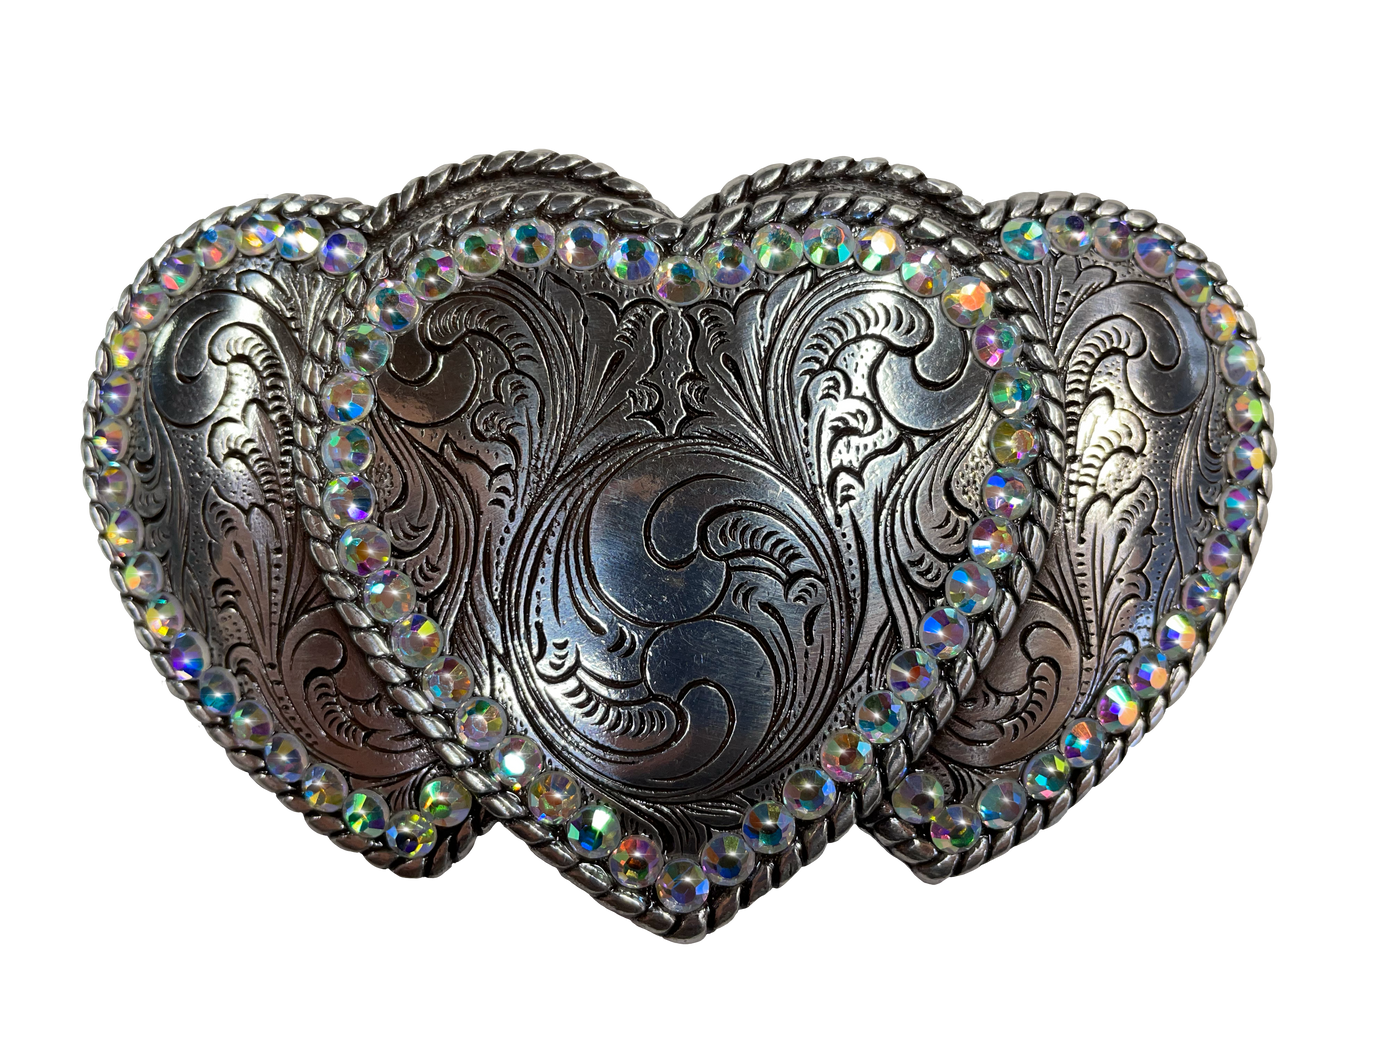 Popular Nocona Three Hearts Buckle in Blazin Roxx collection Dimensions are 1 1/2" tall by 4 1/4" wide Engraved scroll design on hearts with edges lined in rhinestones Sold online and in our shop in Smyrna, TN, just outside of Nashville.